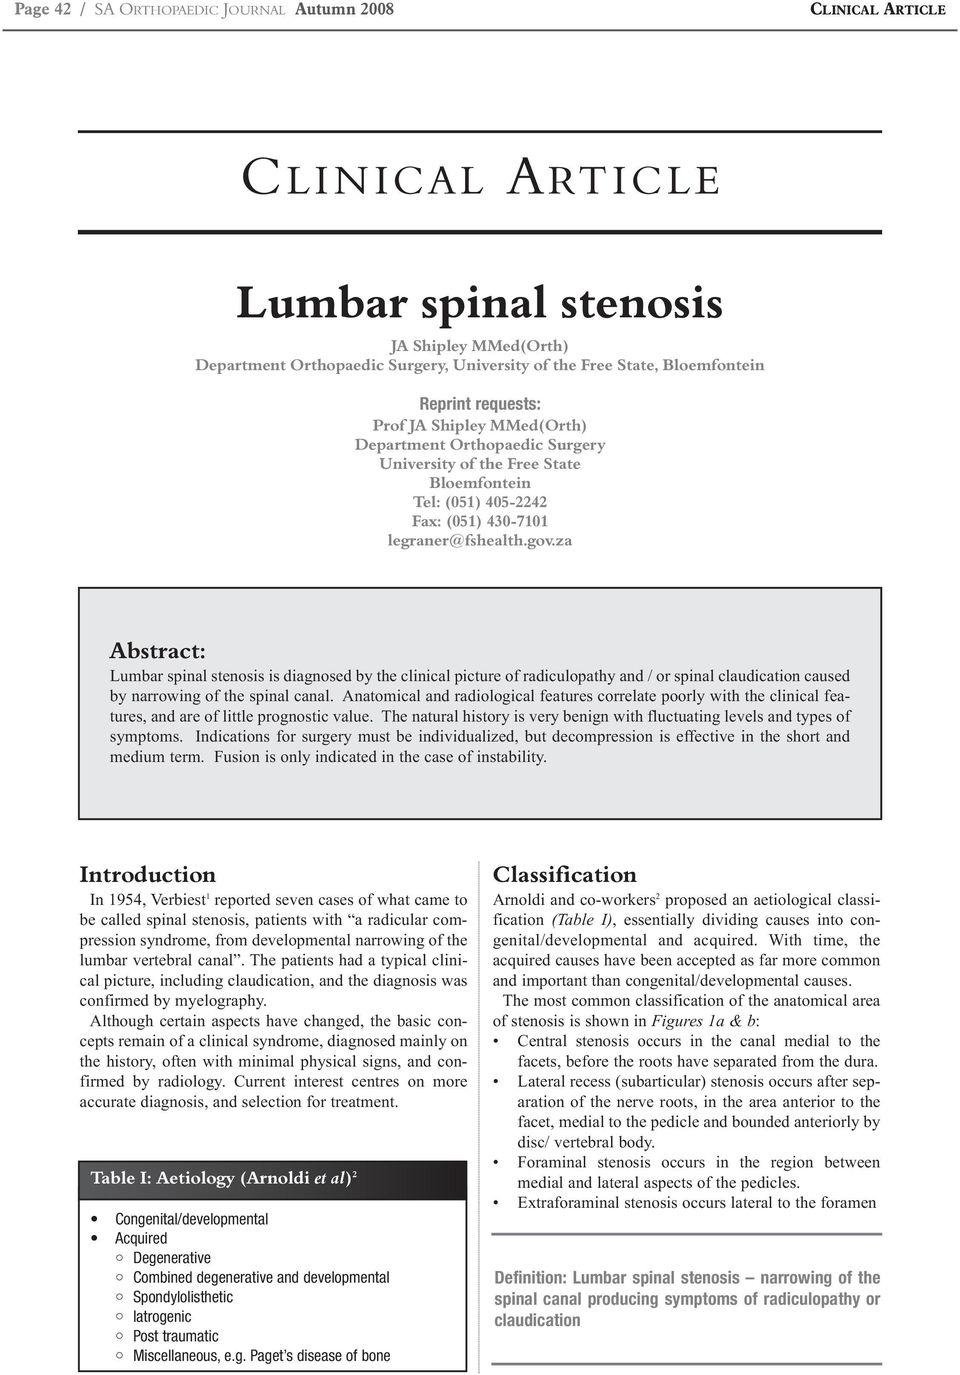 lumbar spinal stenosis ja shipley mmed(orth) department orthopaedic